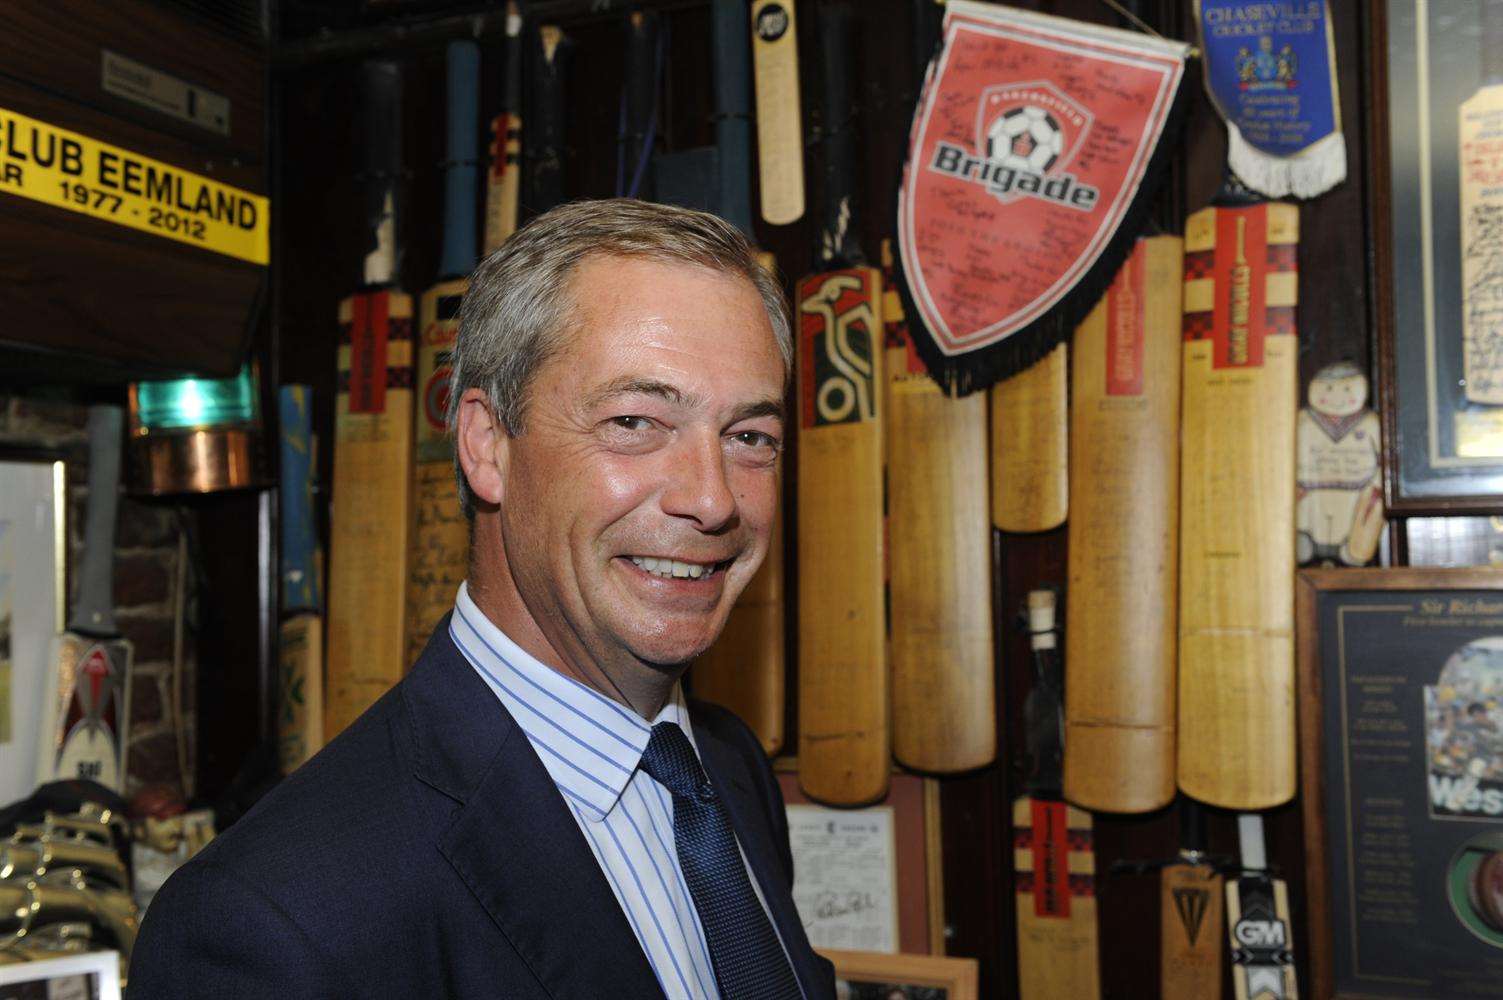 Nigel Farage was the favourite to win the Ukip nomination. Picture: Tony Flashman